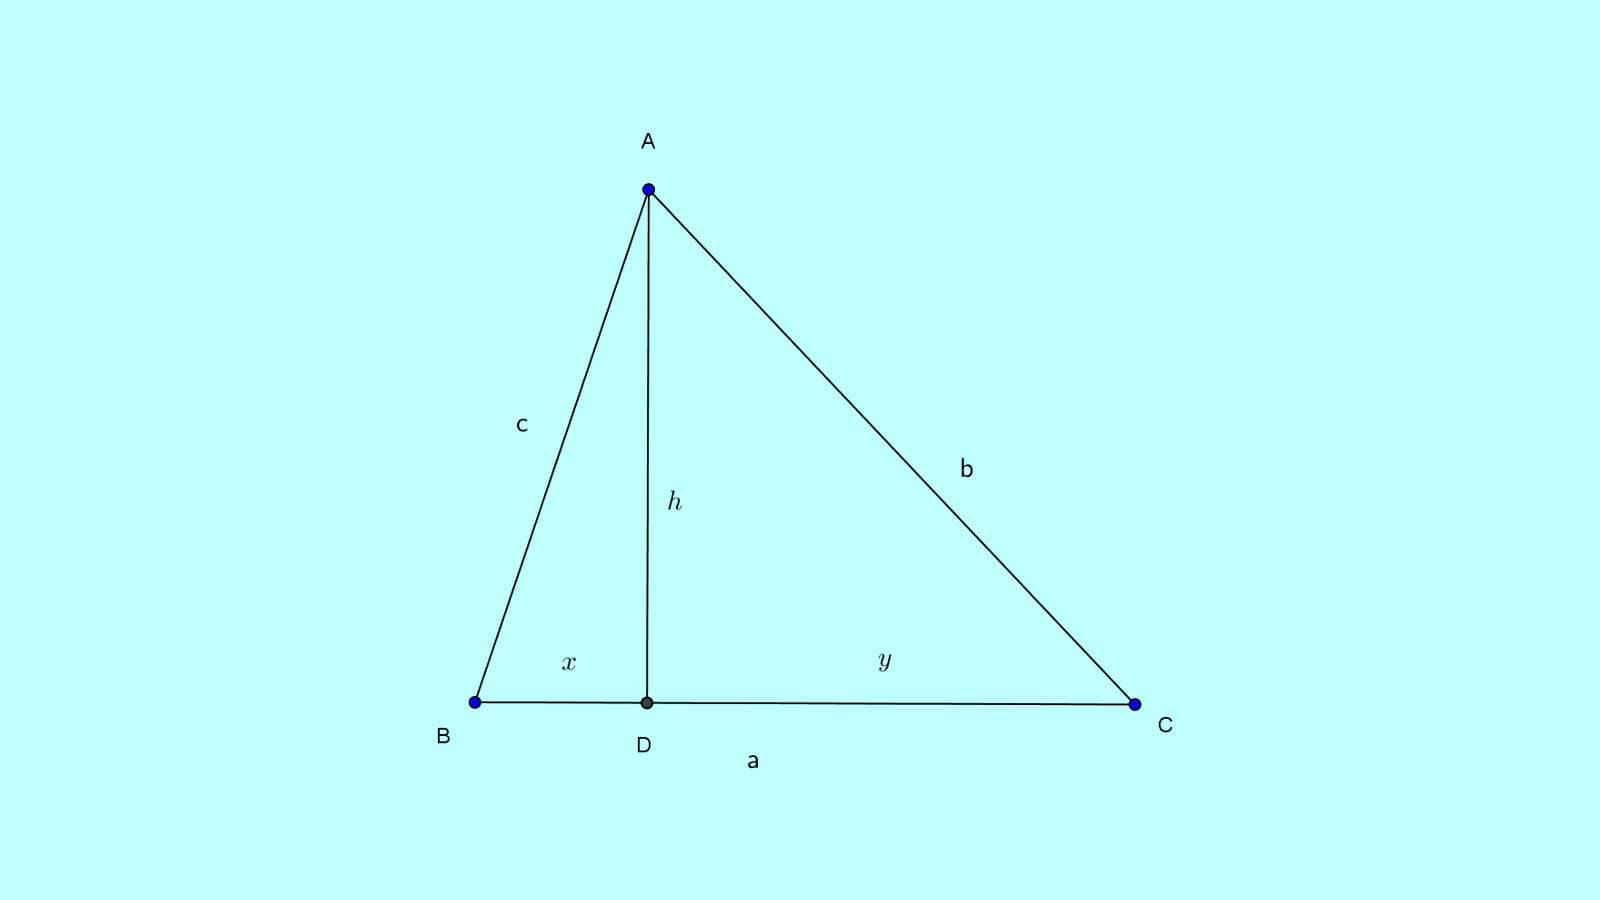 geometry basics - law of sines and cosines